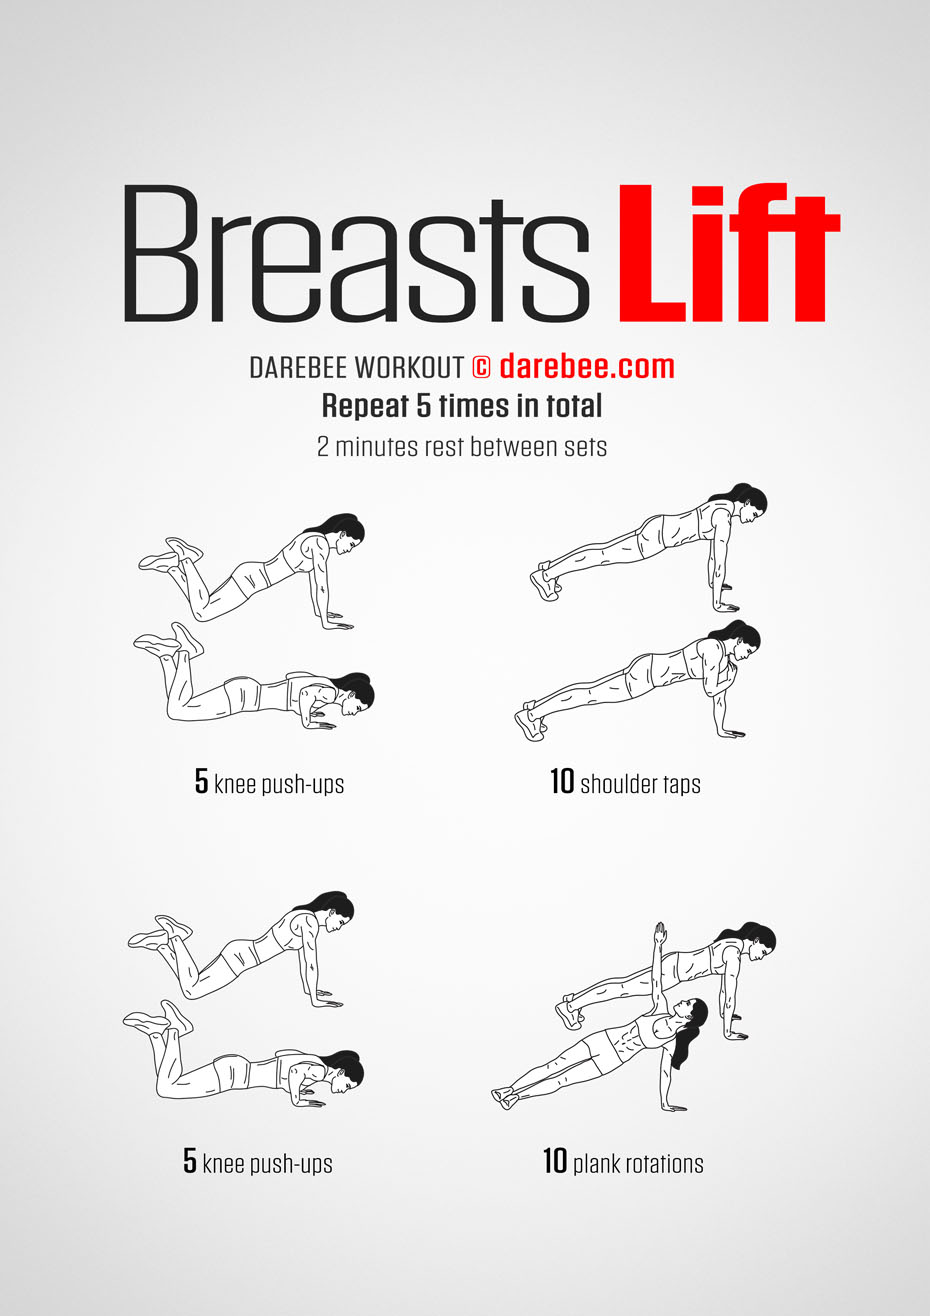 The #1 Breast Lift Workout for a Firmer, Perkier Chest, Trainer